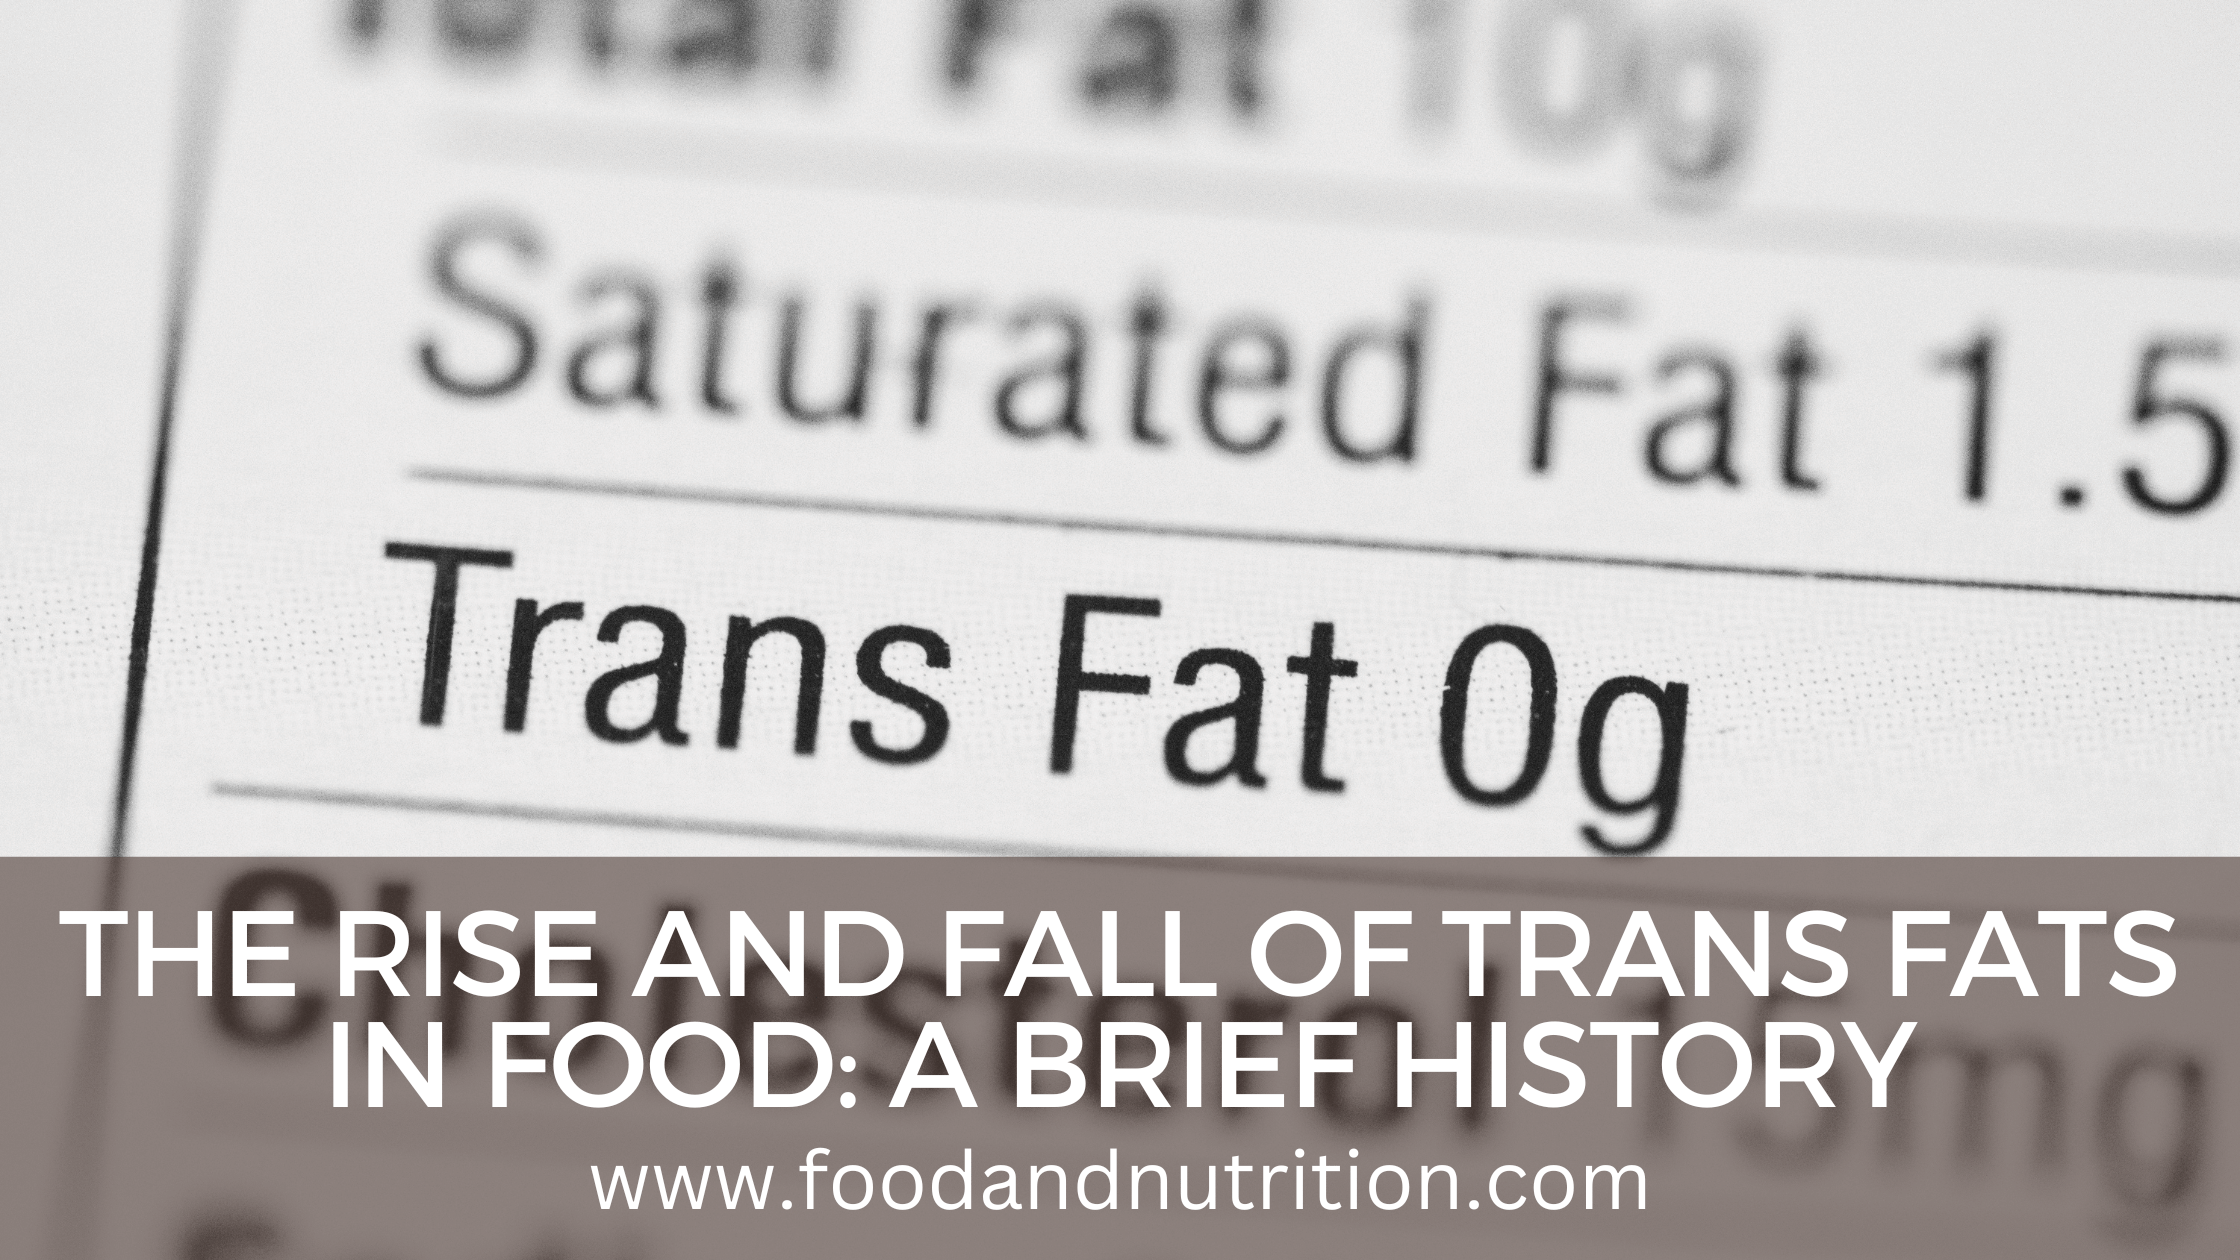 The Rise and Fall of Trans Fats in Food: A Brief History